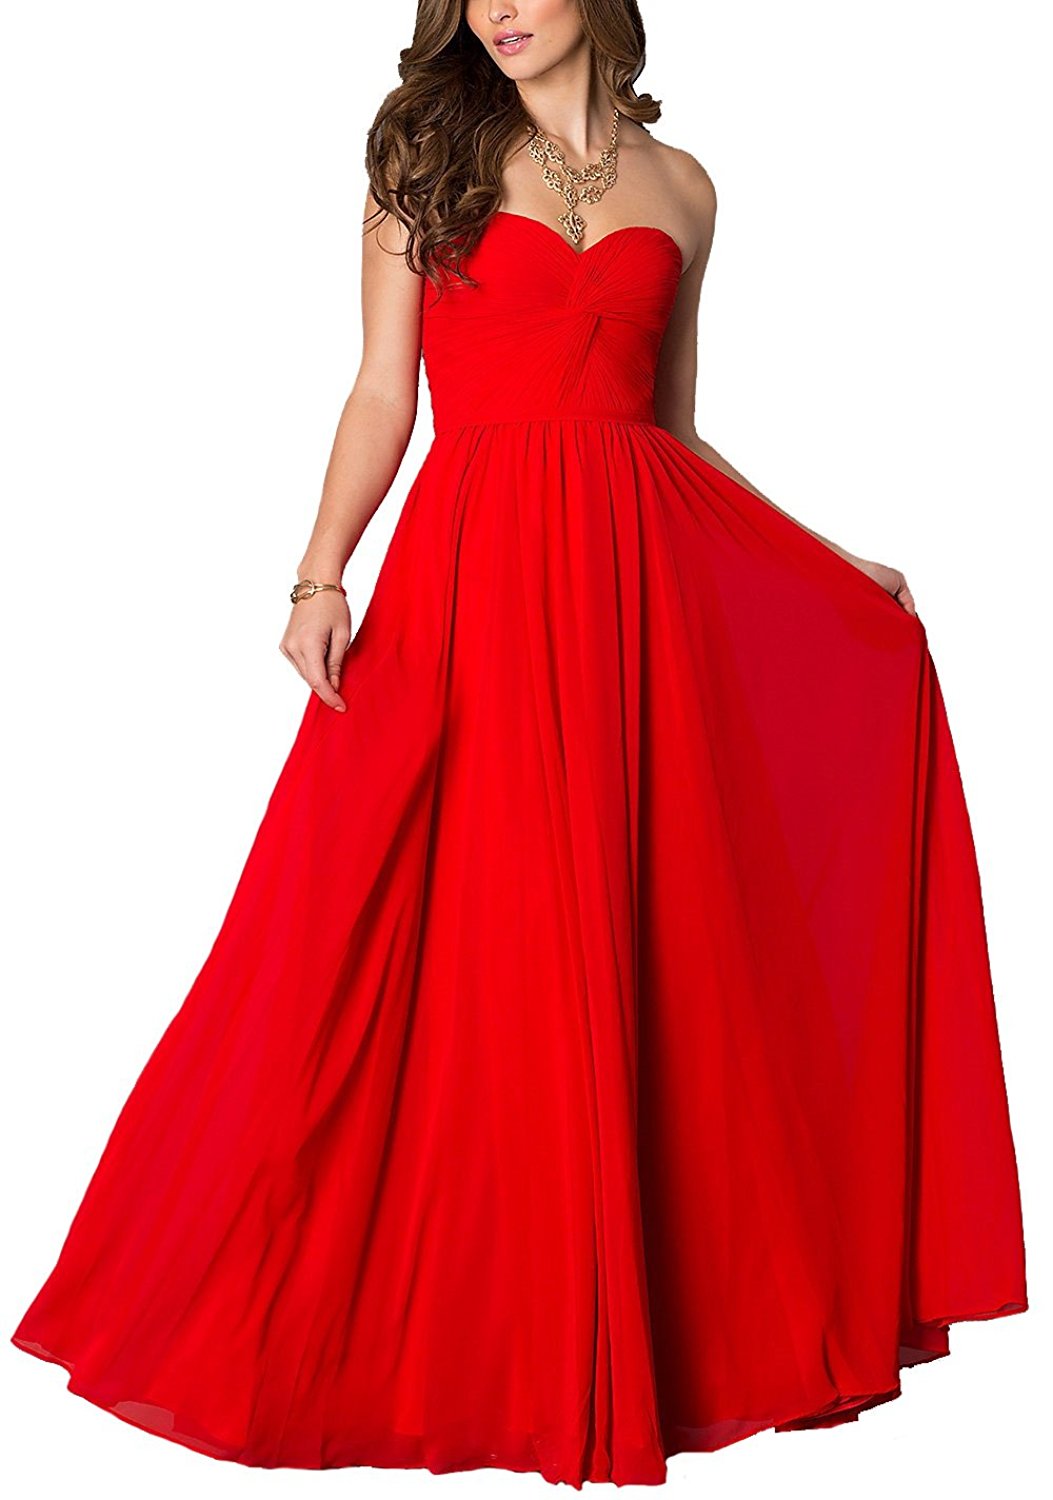 Best Long Red Dresses For Weddings of all time Check it out now 